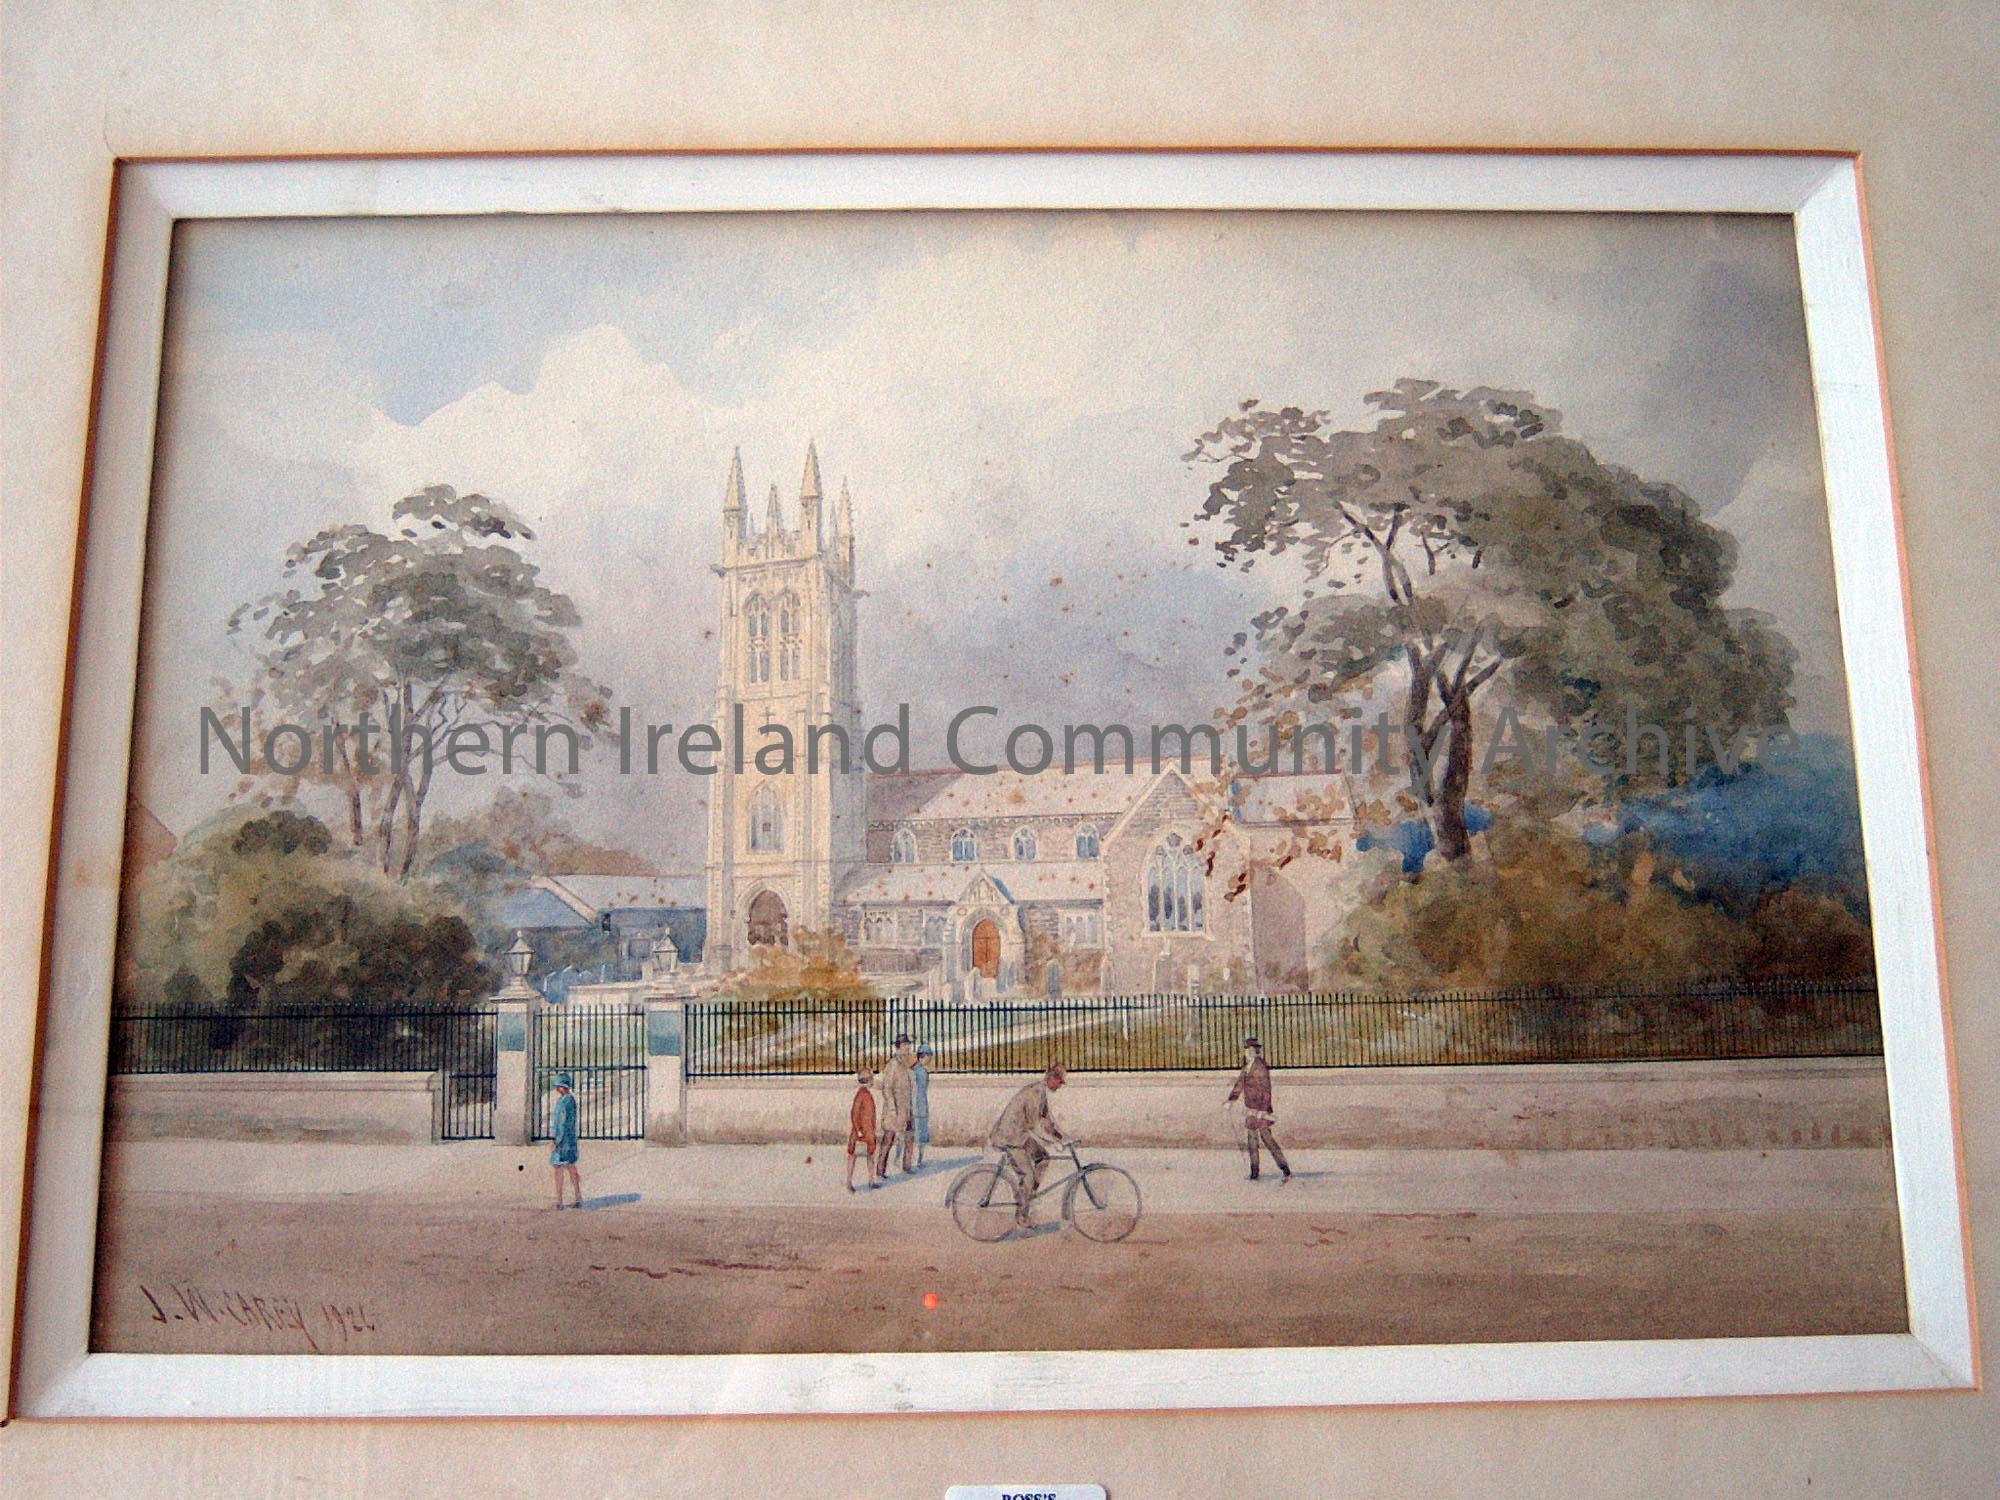 watercolour painting of St.Patricks Church, Coleraine by J W Carey. Features gate around the church with pedestrians on the street in front. (4152)